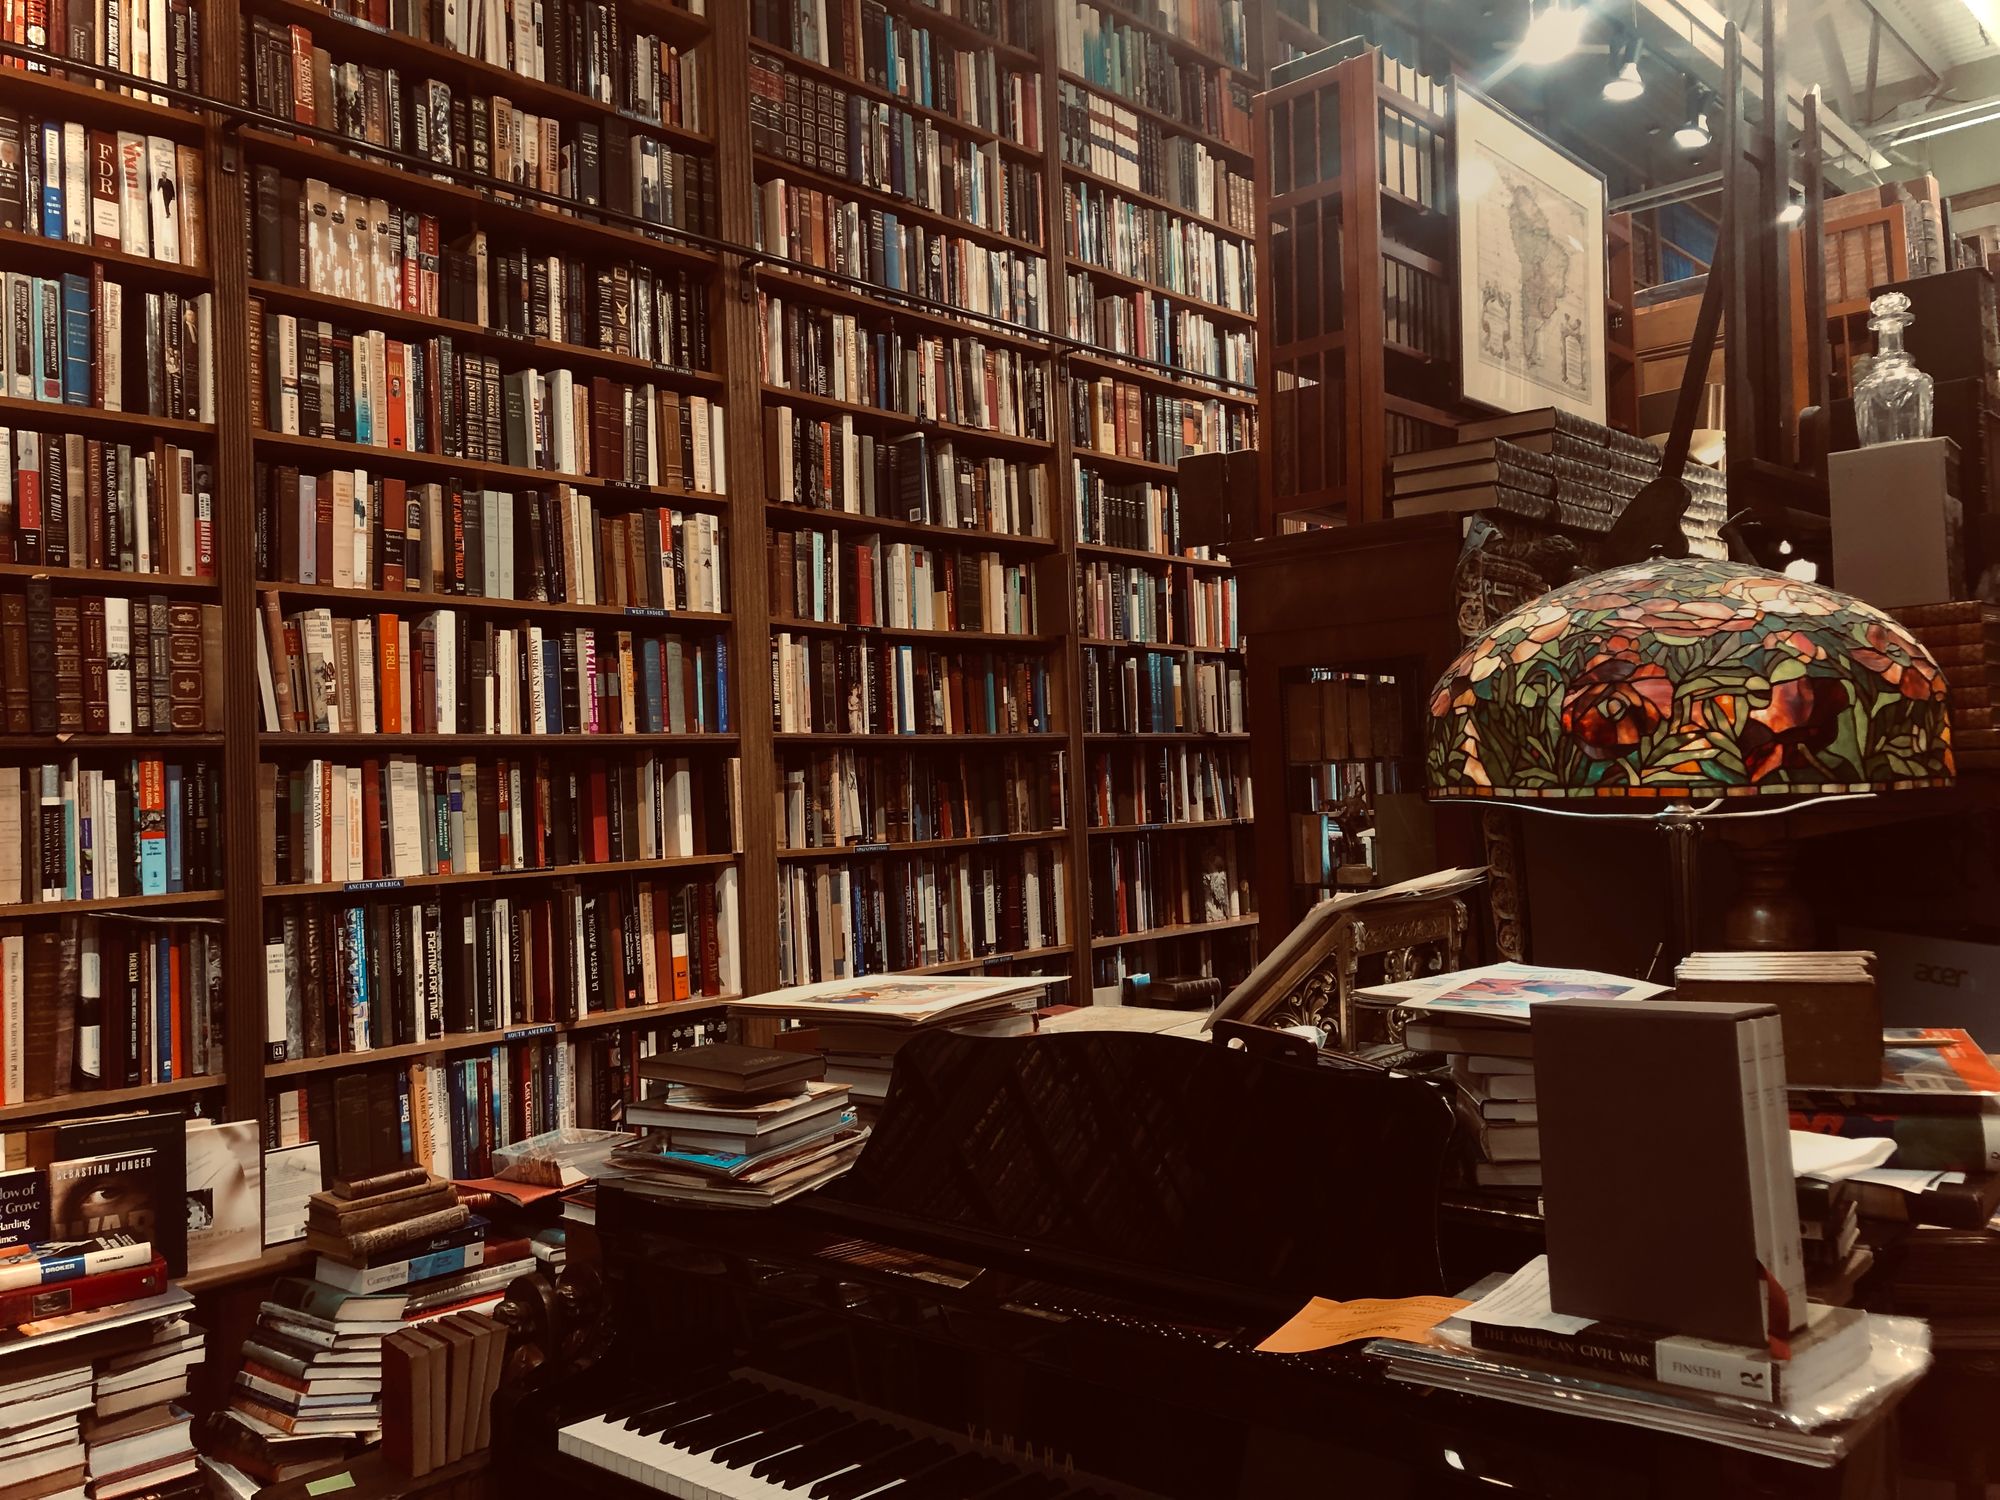 Interior of a classic bookstore with wall-to-wall wooden bookshelves, piano, and antiques.